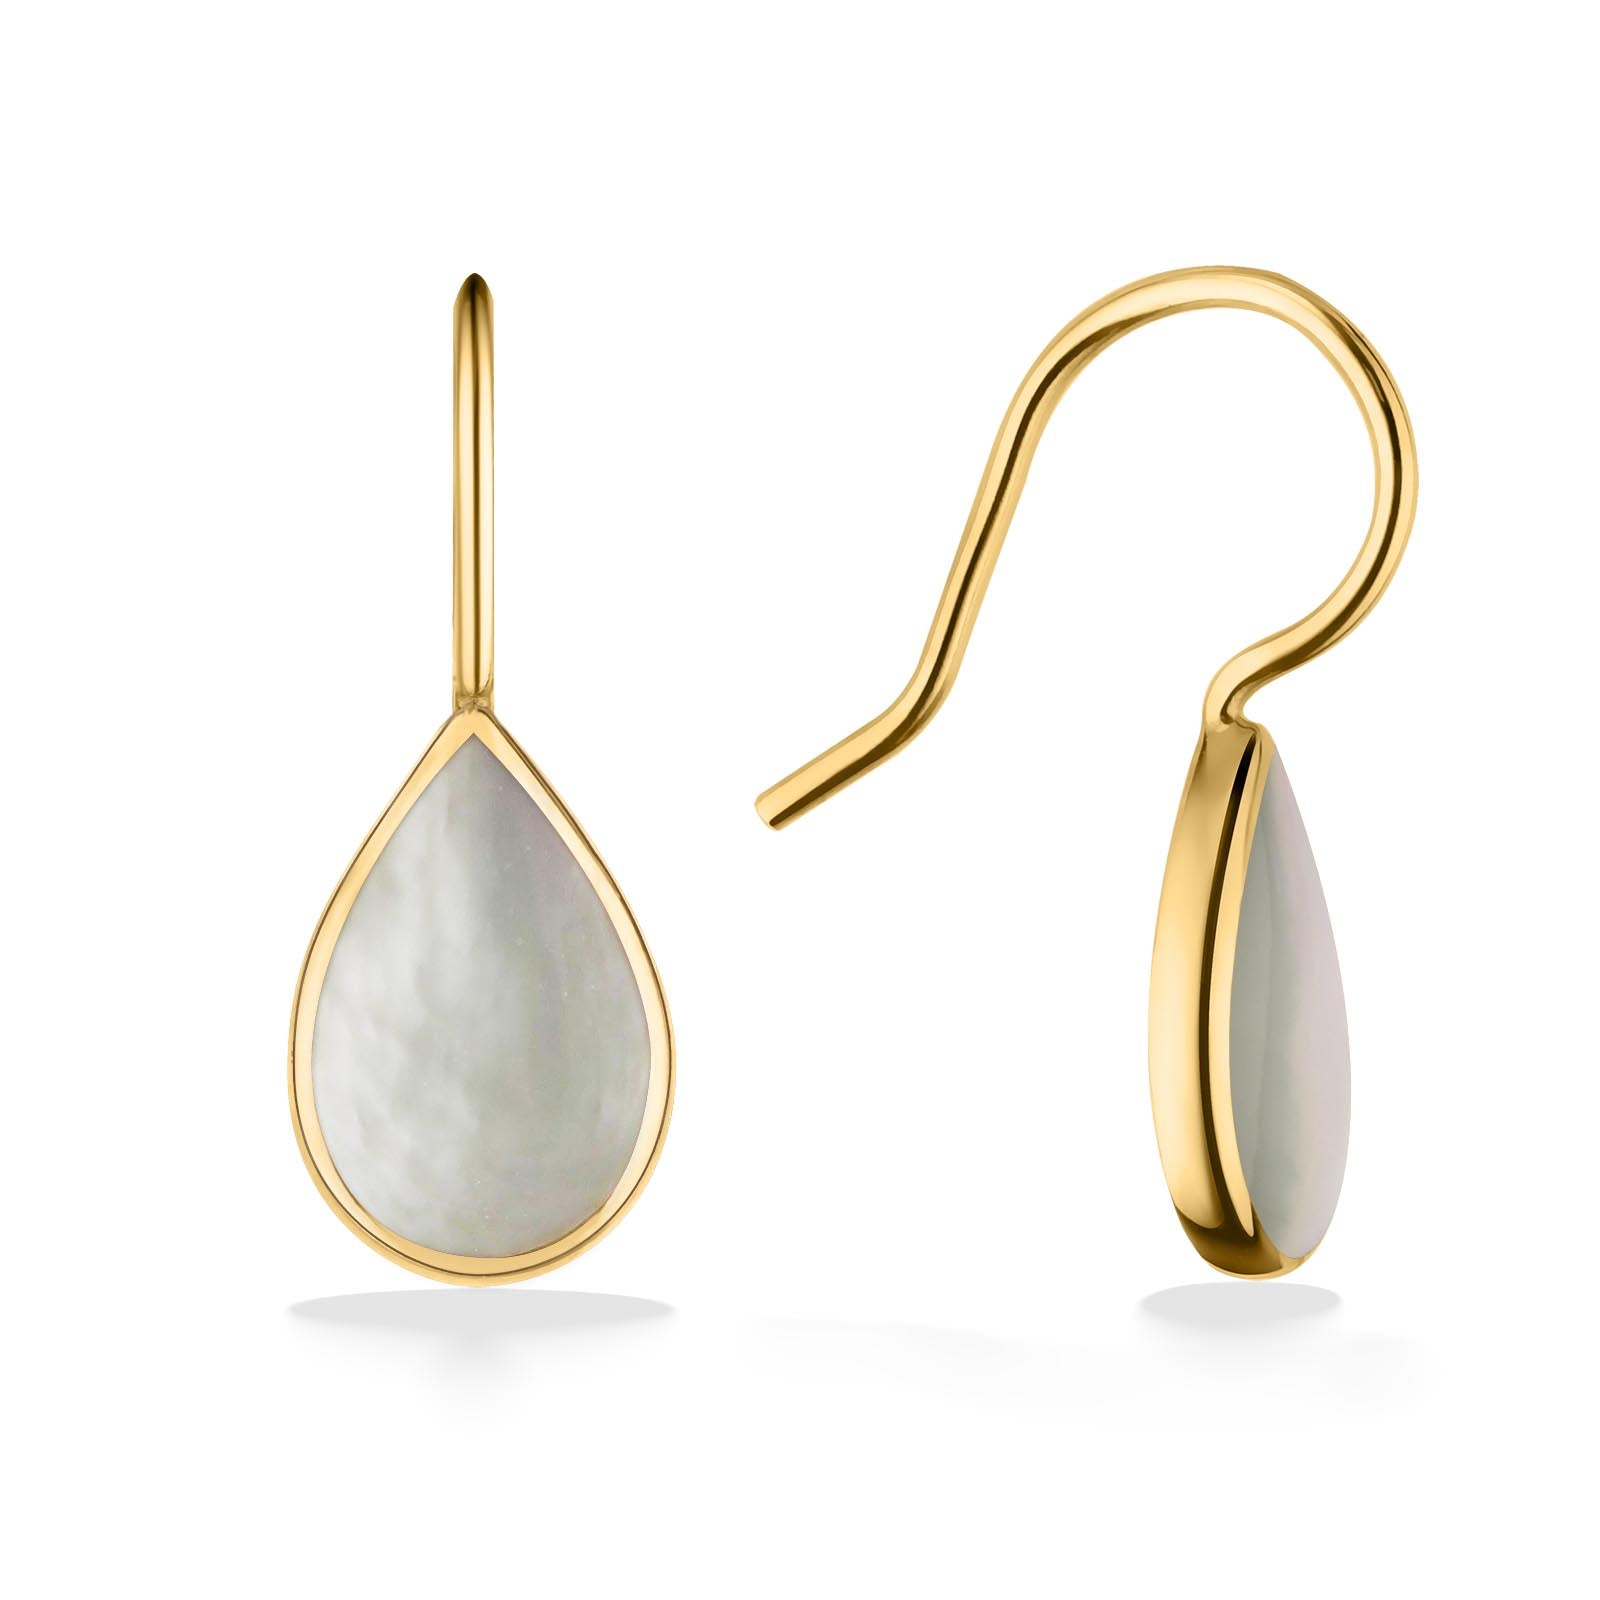 761729 - 14K Yellow Gold - Kabana Pear Shaped Inlay French Wire Earrings